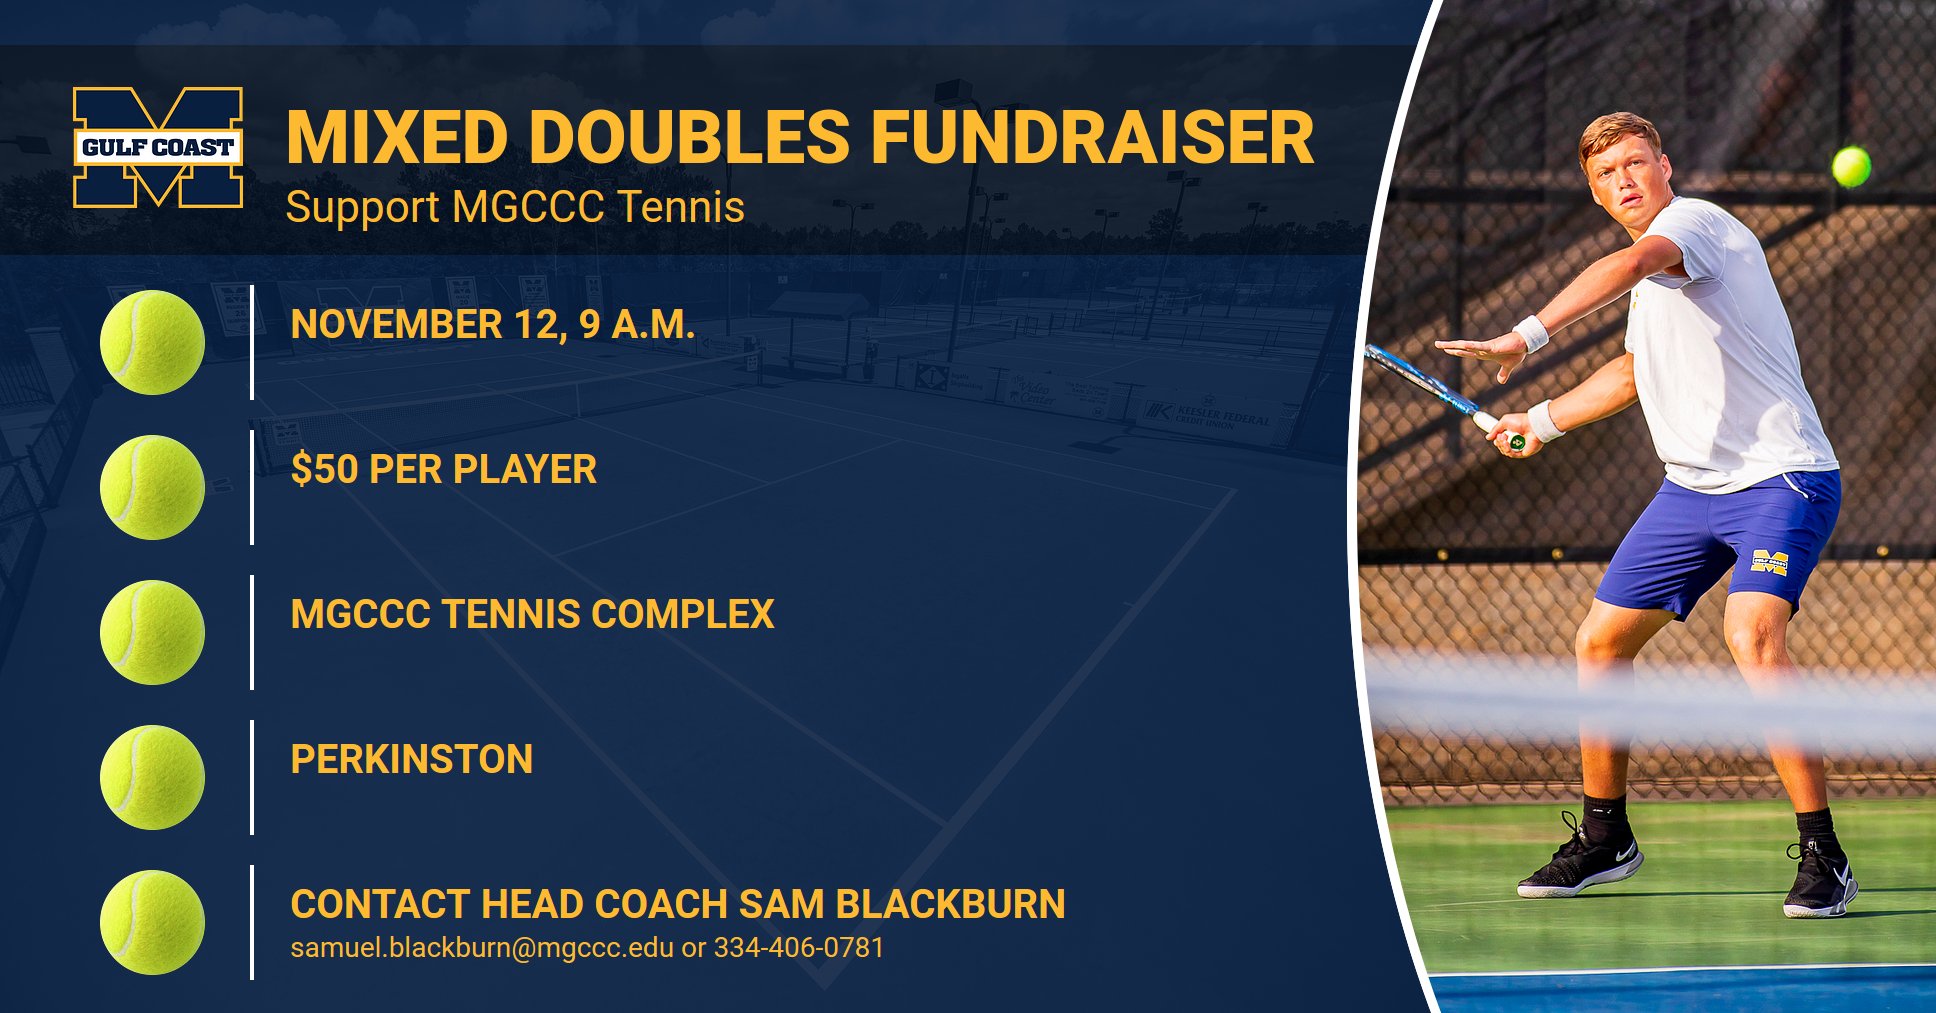 UPDATE: Mixed doubles fundraiser set moved to Nov. 12